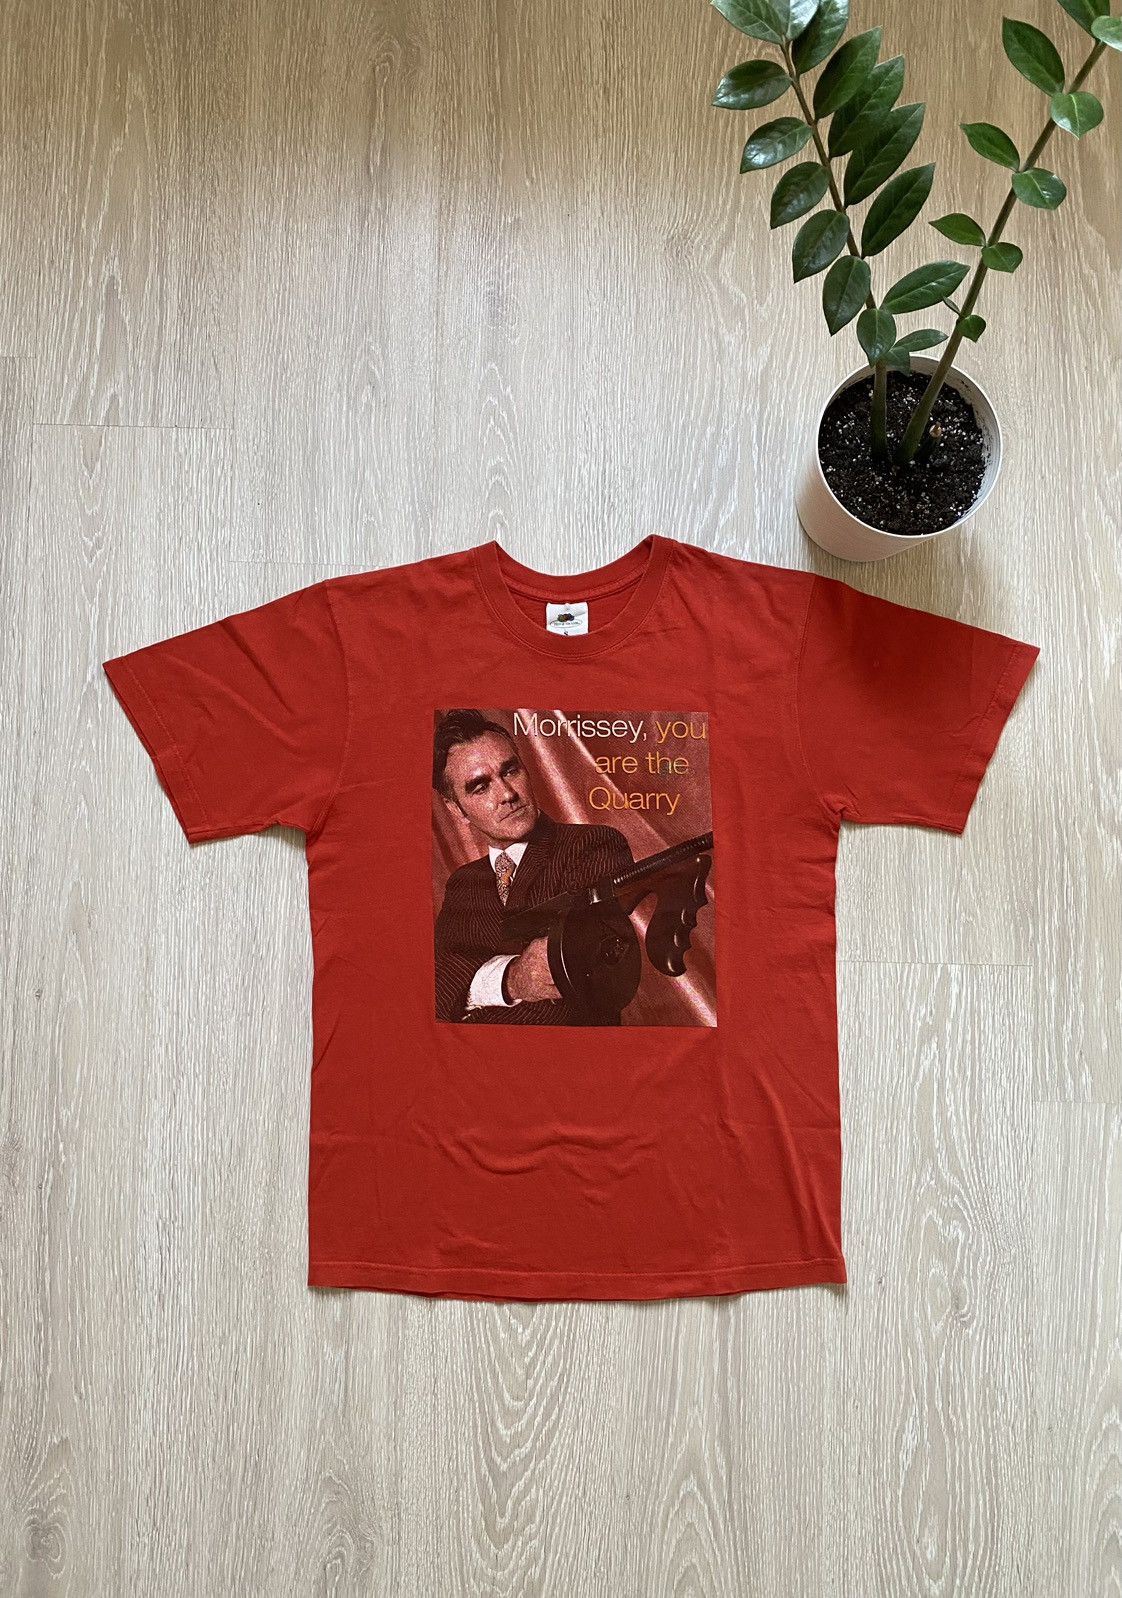 Pre-owned Band Tees X Rock T Shirt Vintage Morrissey You Are The Quarry Tour Red Tee Y2k Style (size Small)